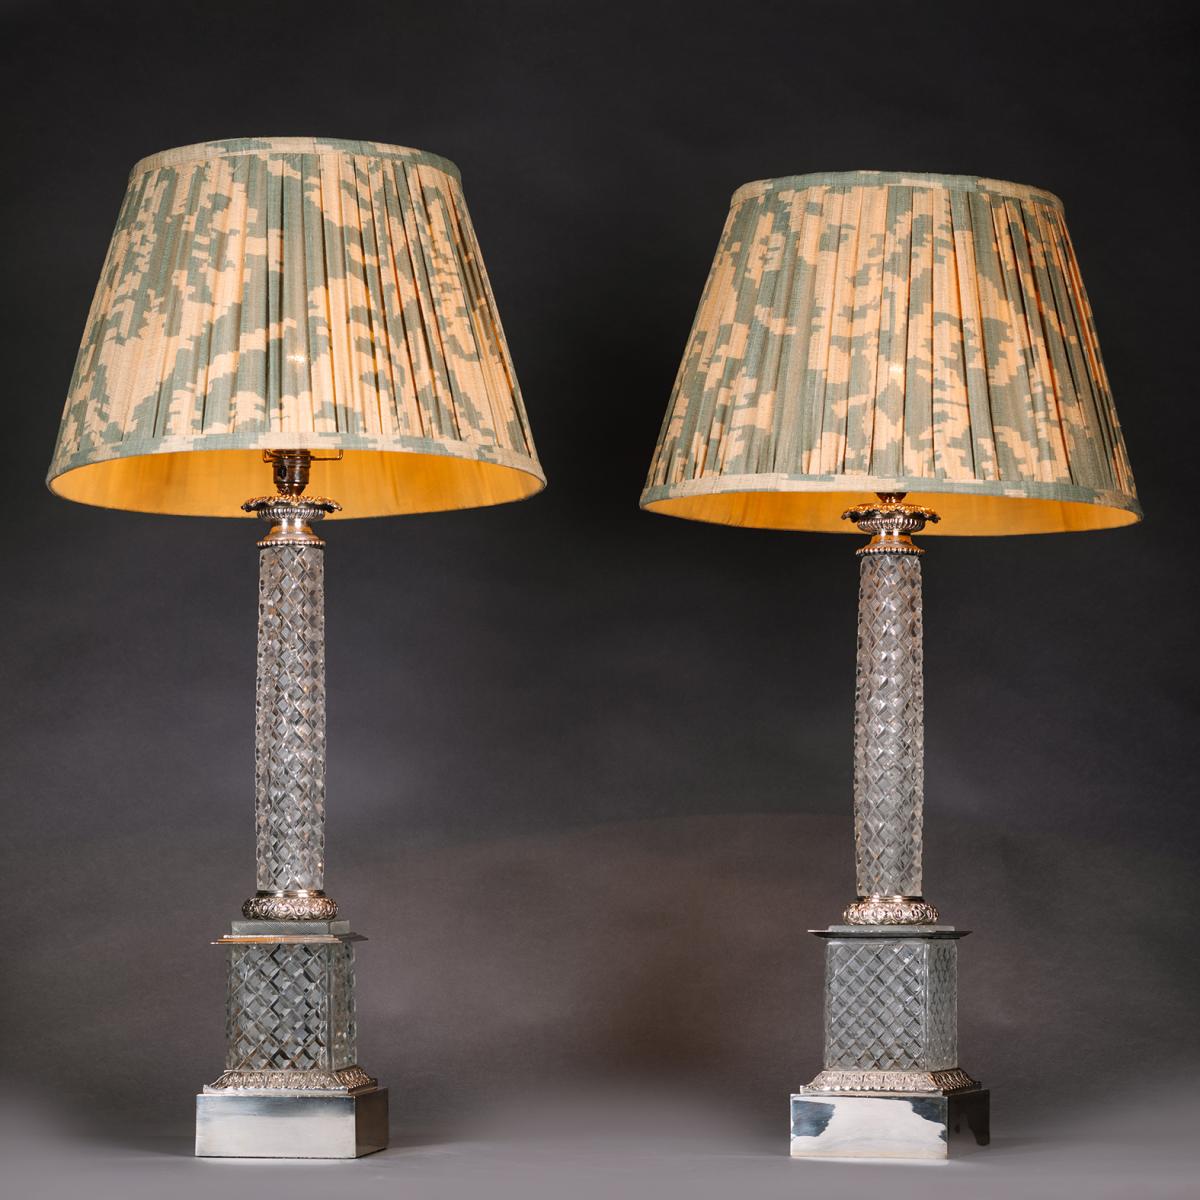 A Pair of Empire Style Cut-Glass and Silvered-Brass Lamps